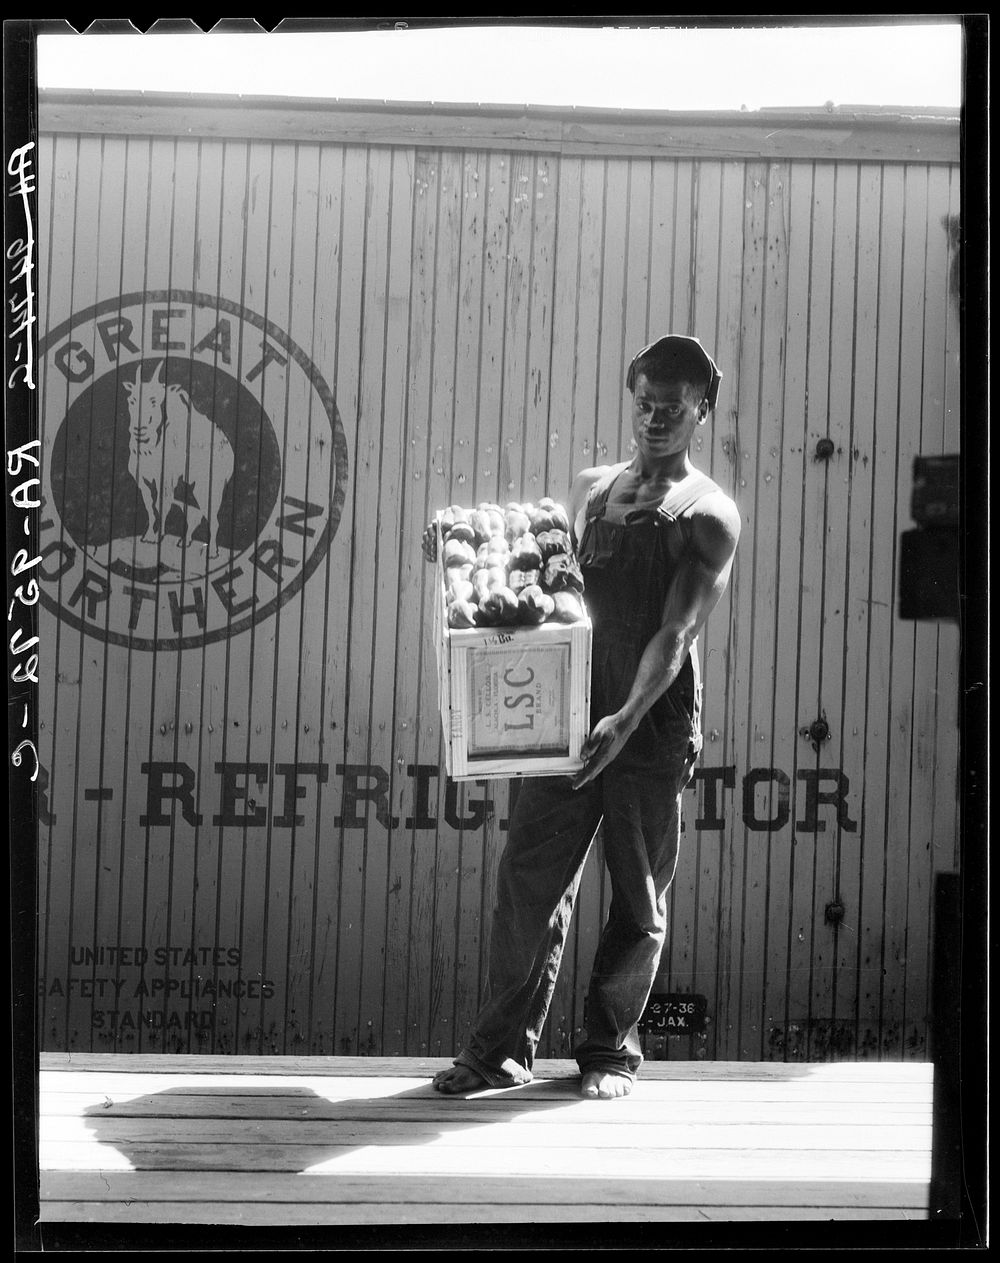 Migrant shed worker. Northeast Florida. Sourced from the Library of Congress.